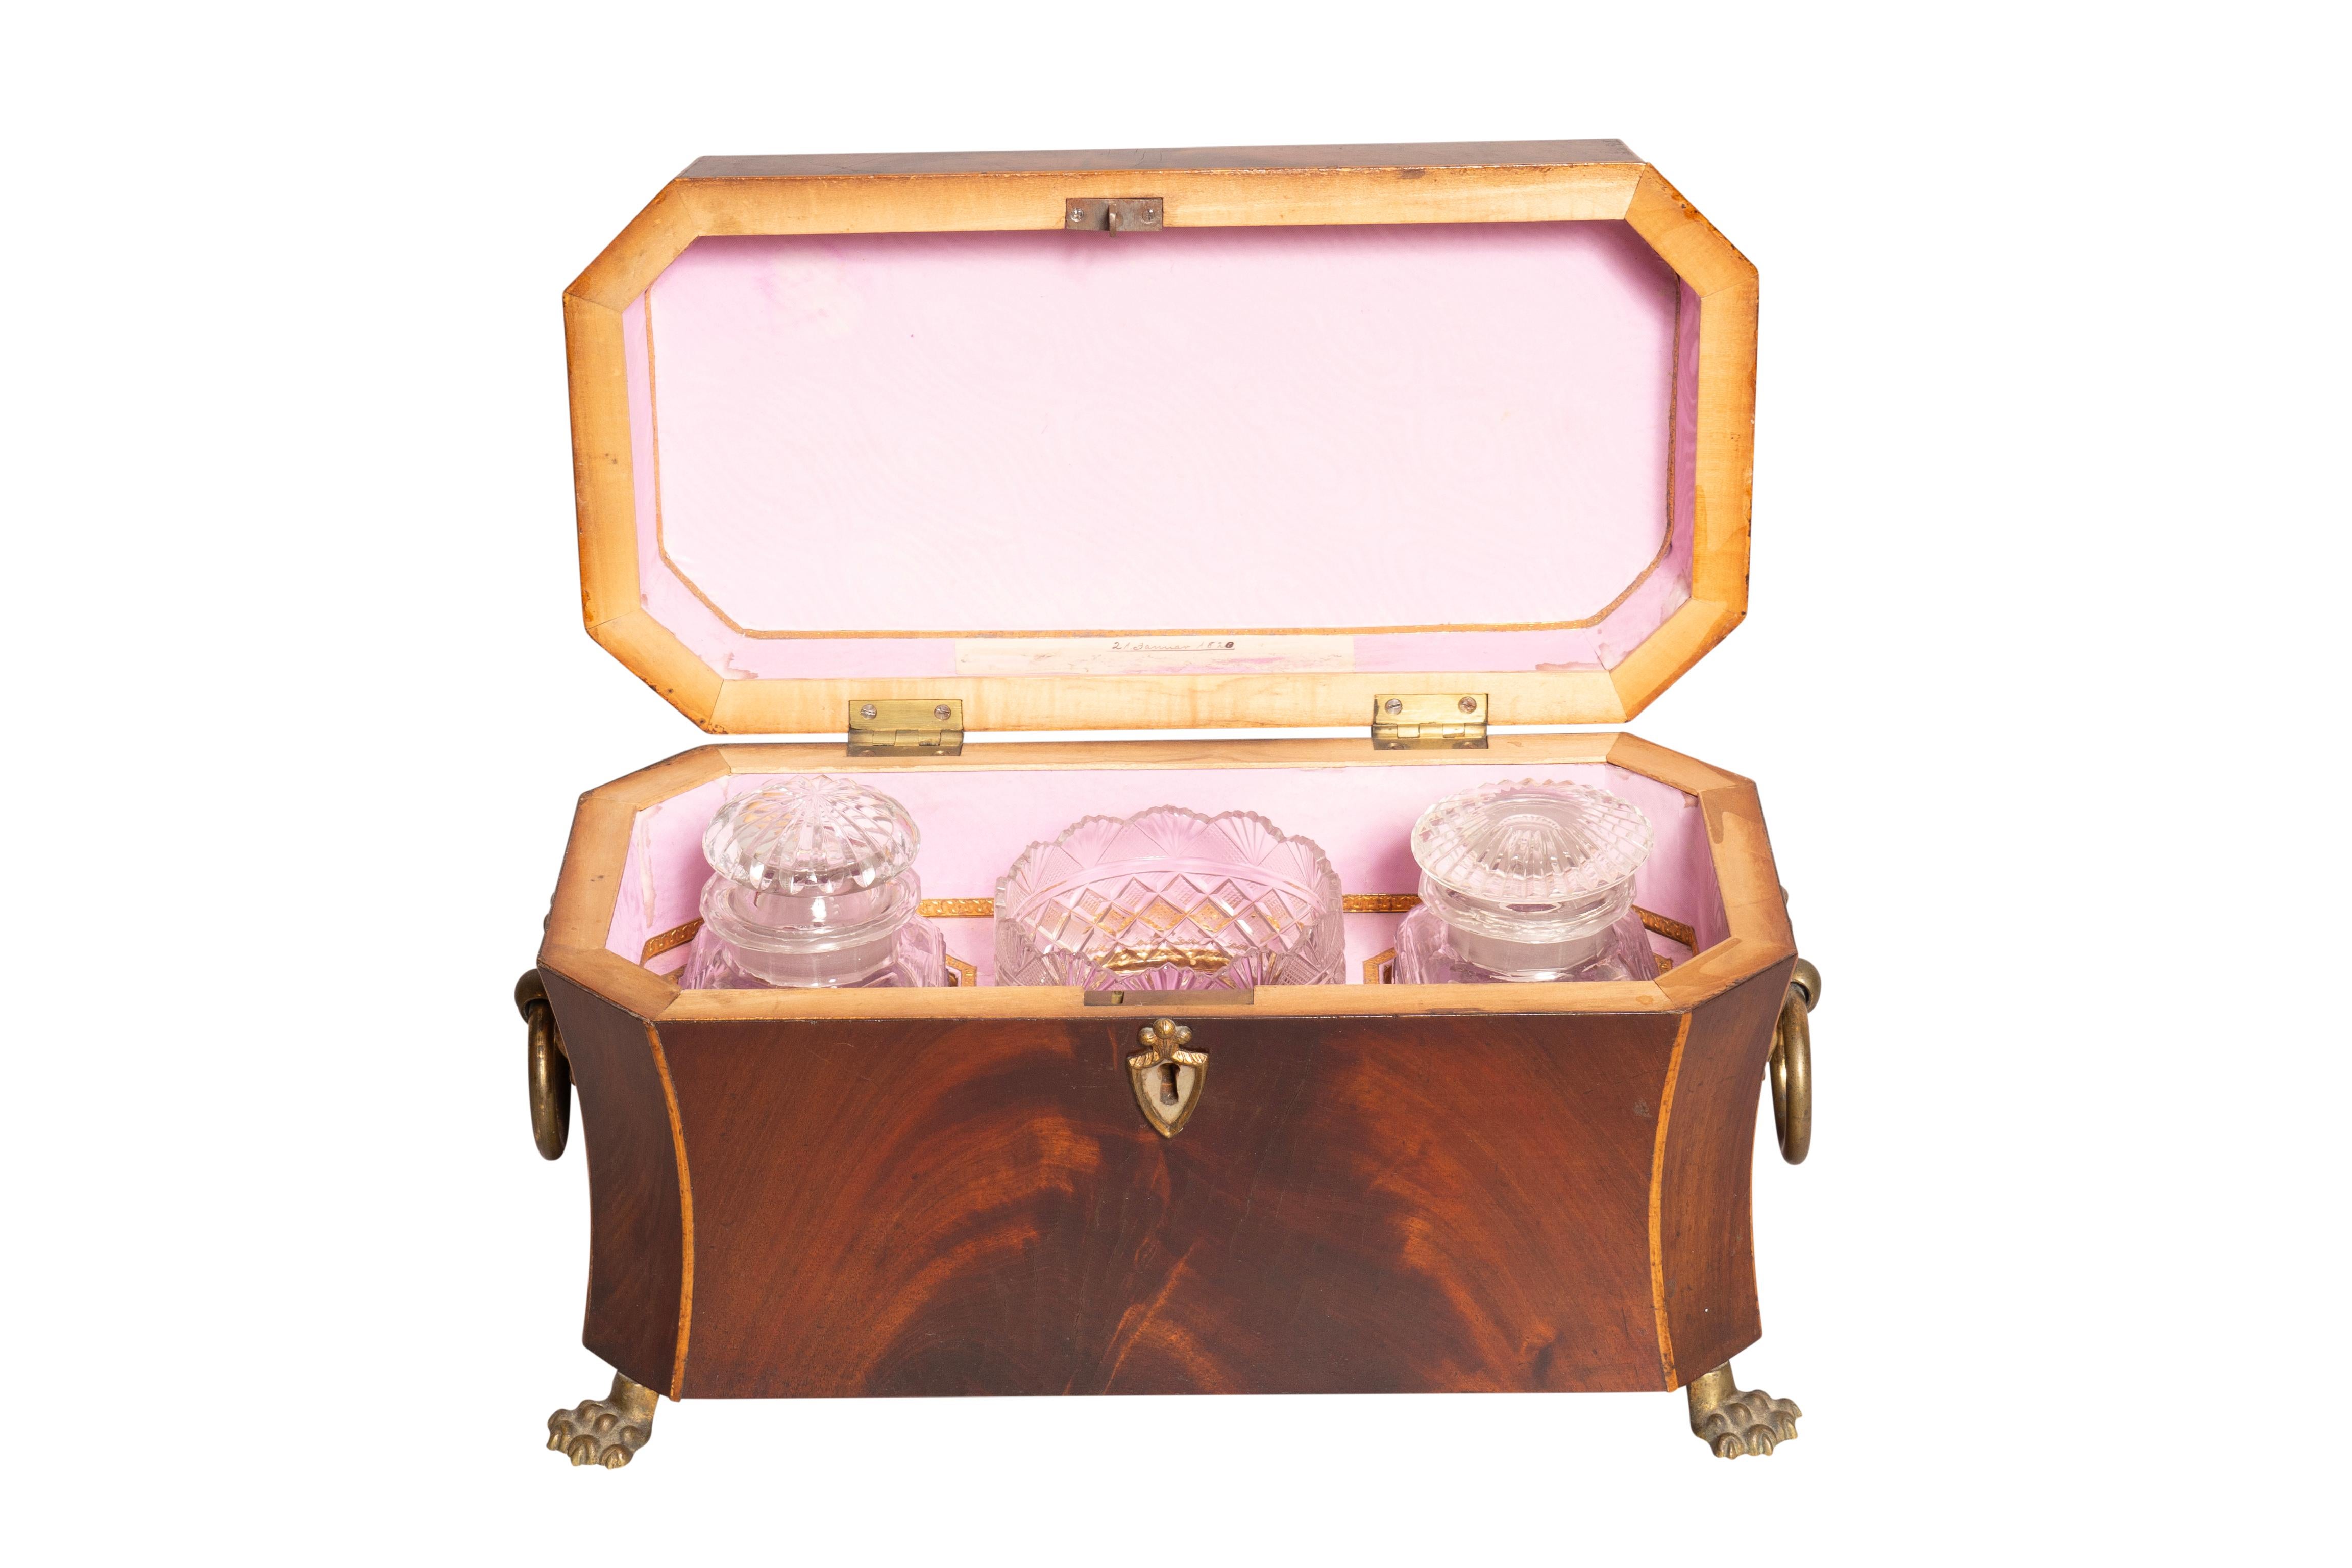 Finest quality dated January 2, 1820. Rectangular hinged top with boxwood stringing along the edge. The interior lined with pink paper and holding two cut glass tea containers and a mixing bowl. Shaped sides showing cabinet makers skill. Brass ring